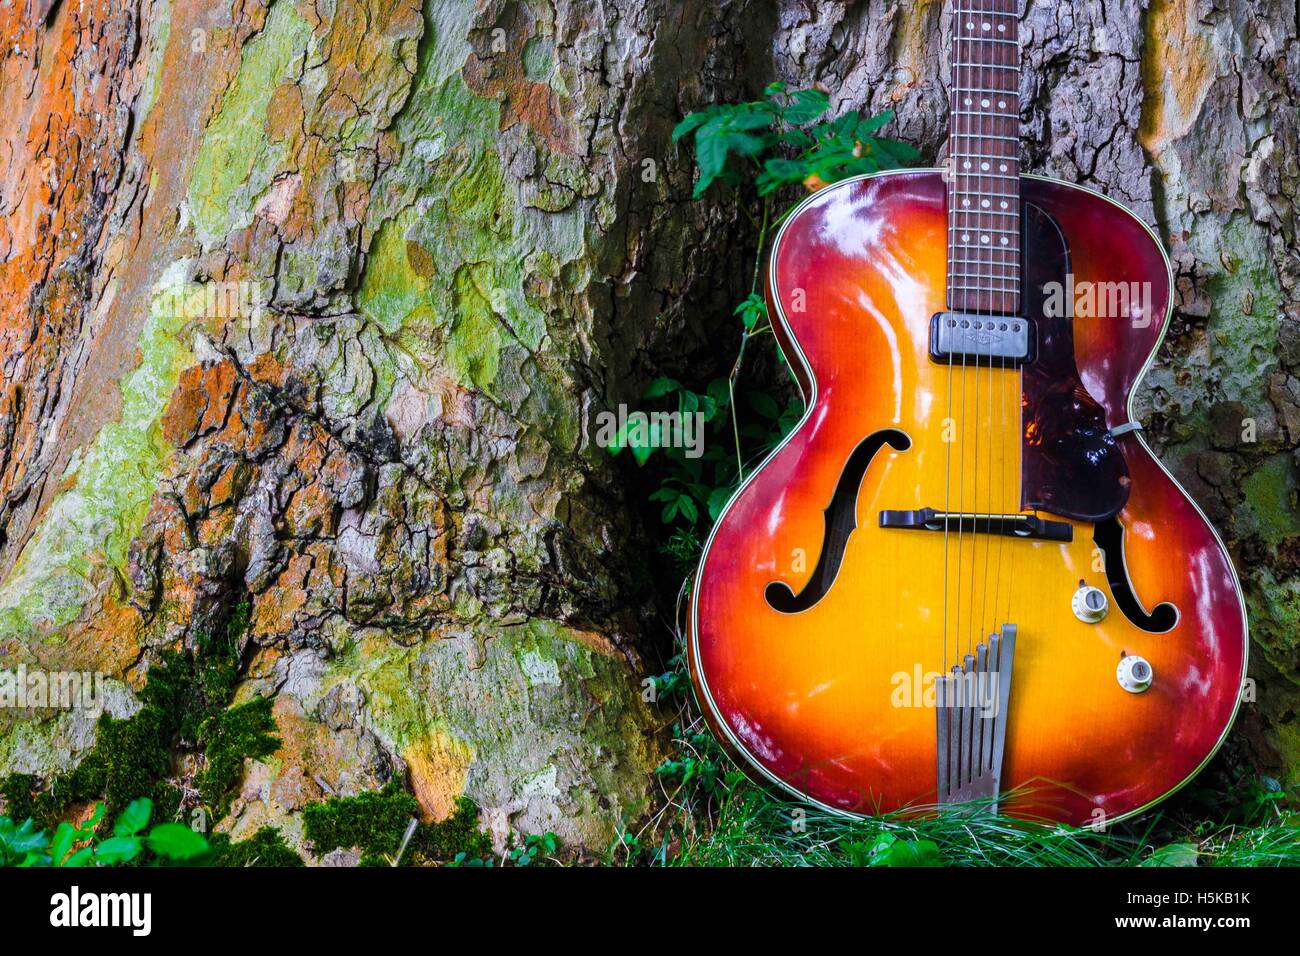 A red and yellow Hofner acoustic guitar leaning against  a tree trunk in a park Stock Photo